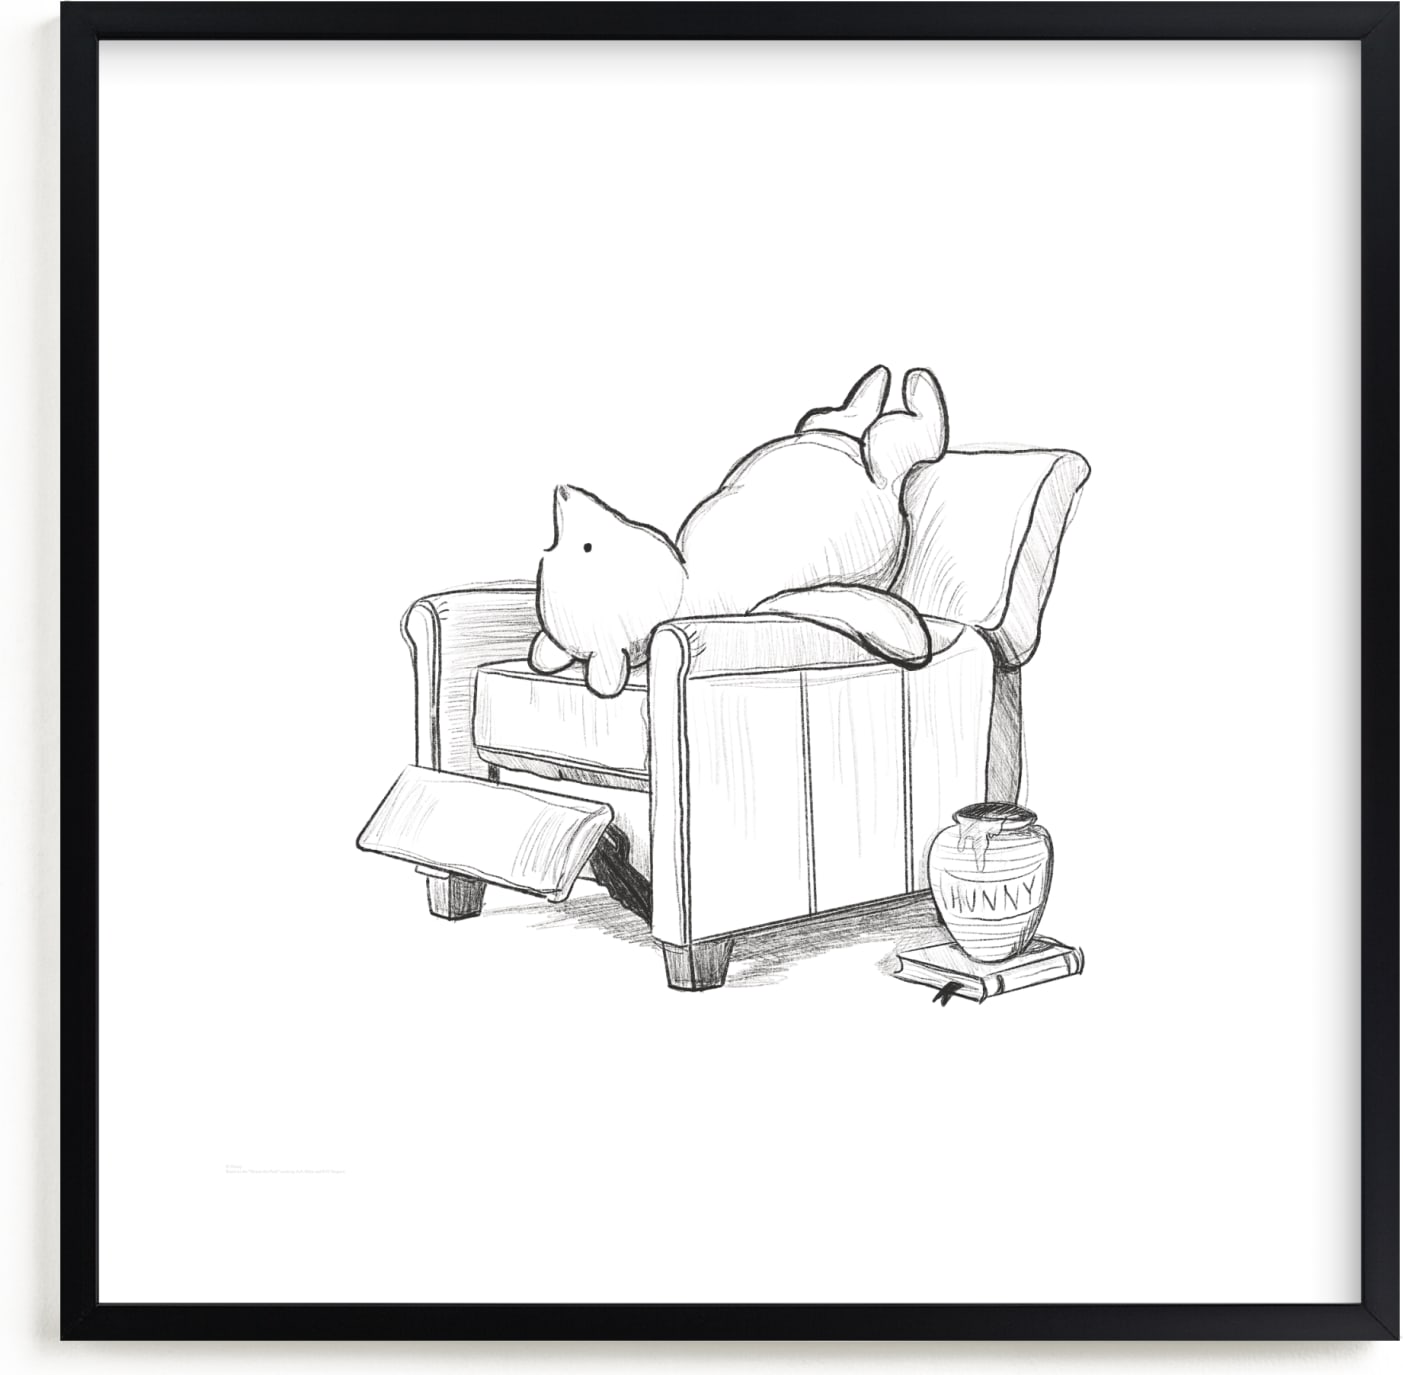 This is a black and white, white disney art by Stefanie Lane called Pooh Lounging from Disney's Winnie The Pooh.